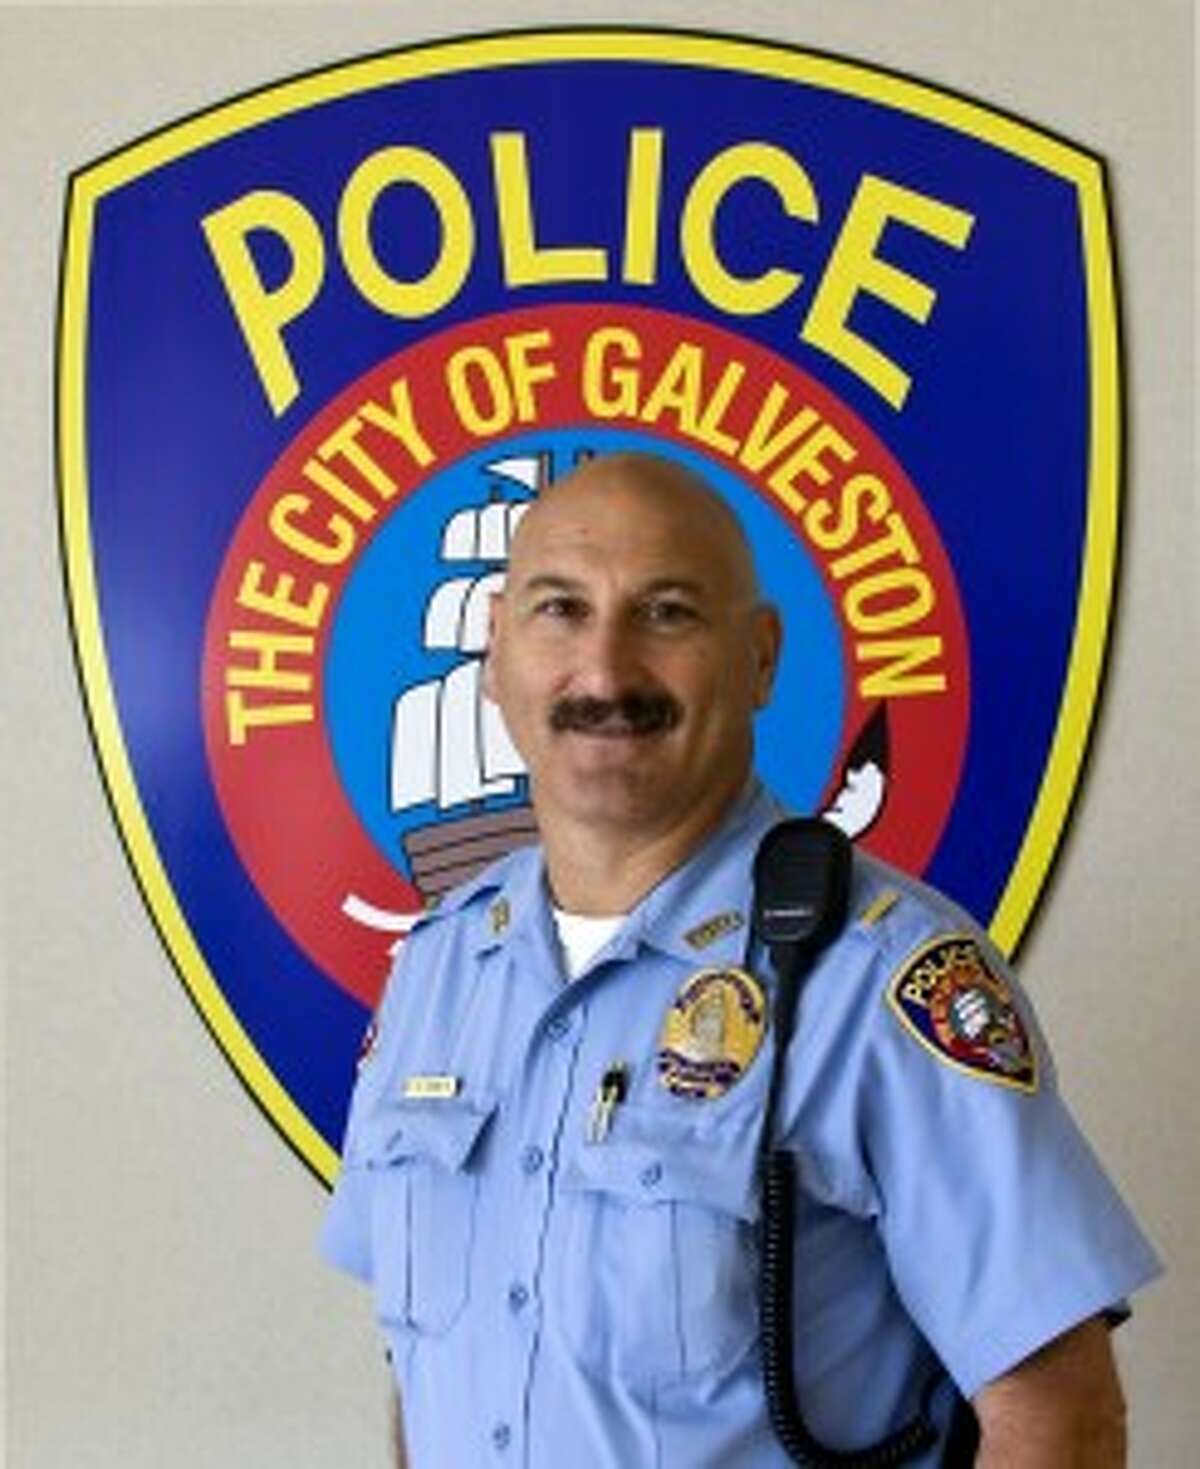 Henry Porretto, who resigned as Galveston police chief, is accused of promising a promotion to a female officer in return for sexual favors.